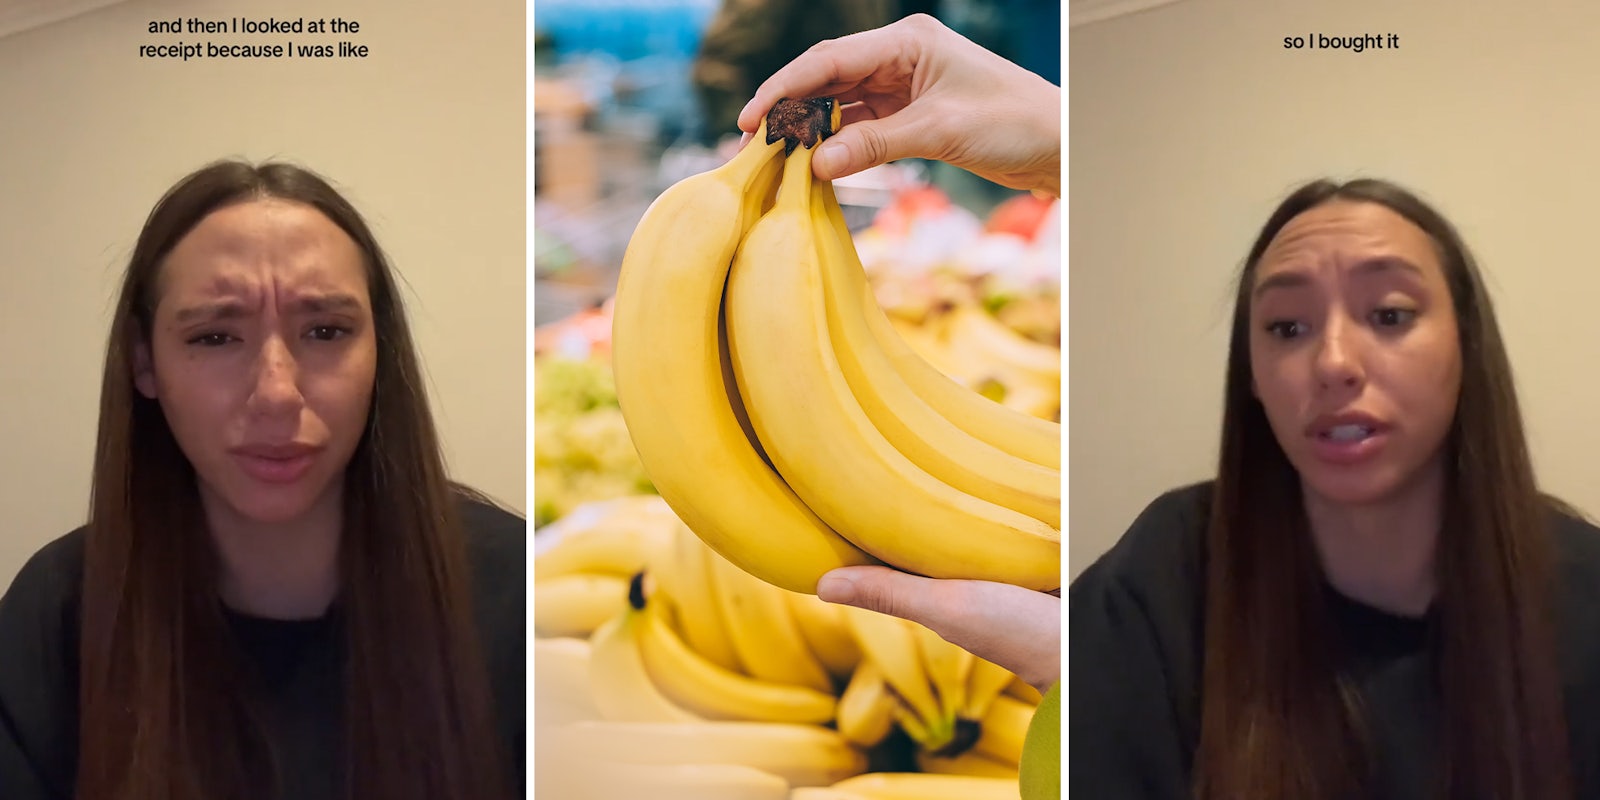 Woman Tries to Buy 5 Bananas, Gets Charged 50 Instead